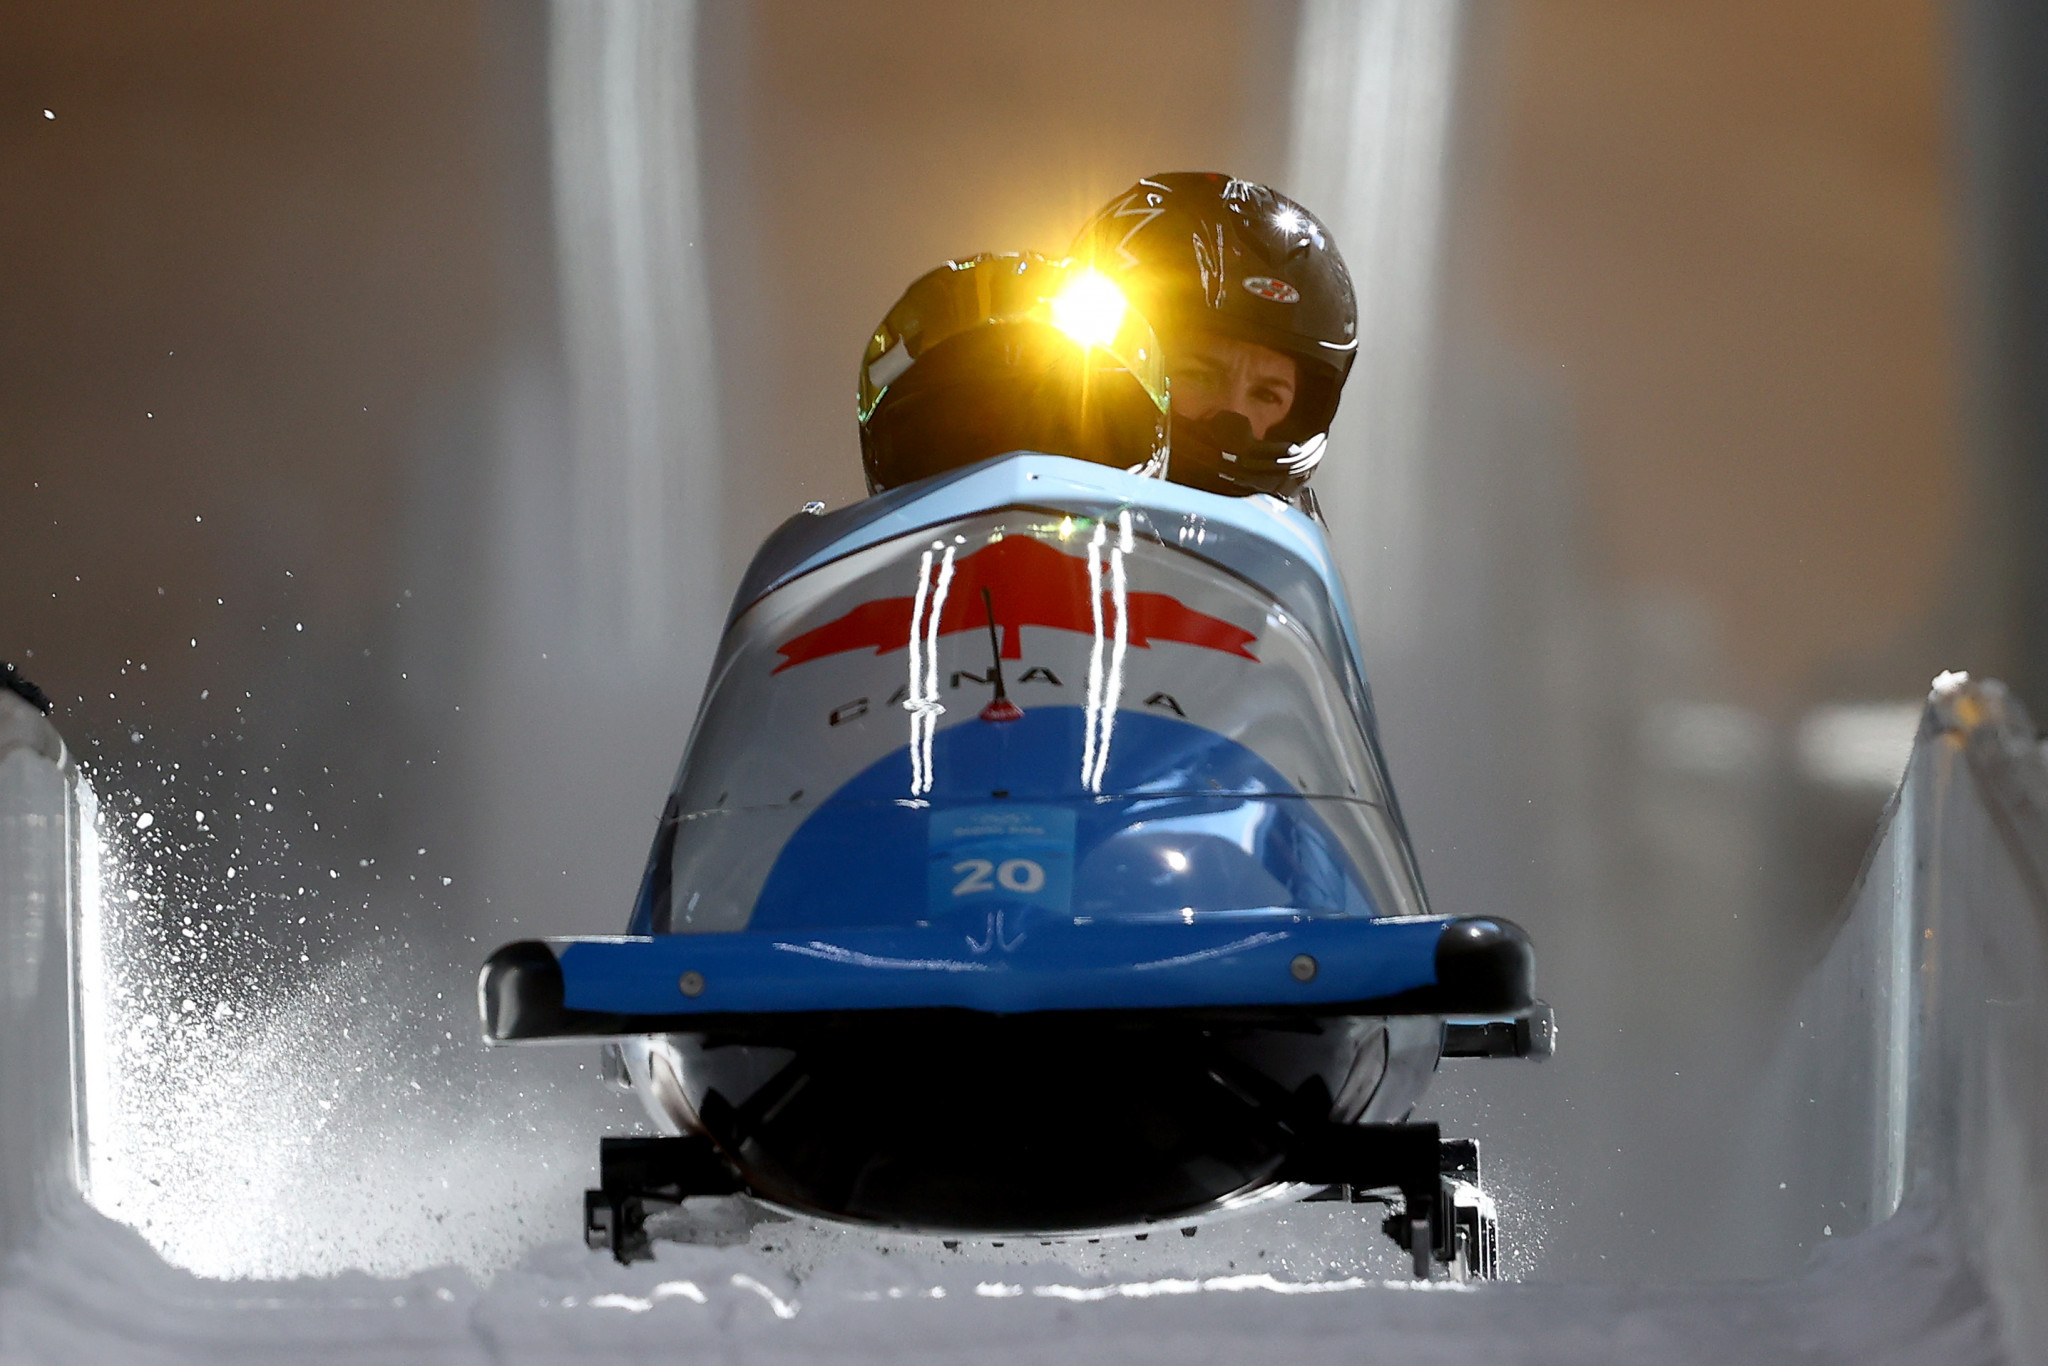 Bobsleigh Canada Skeleton has new leadership after a turbulent nine months ©Getty Images